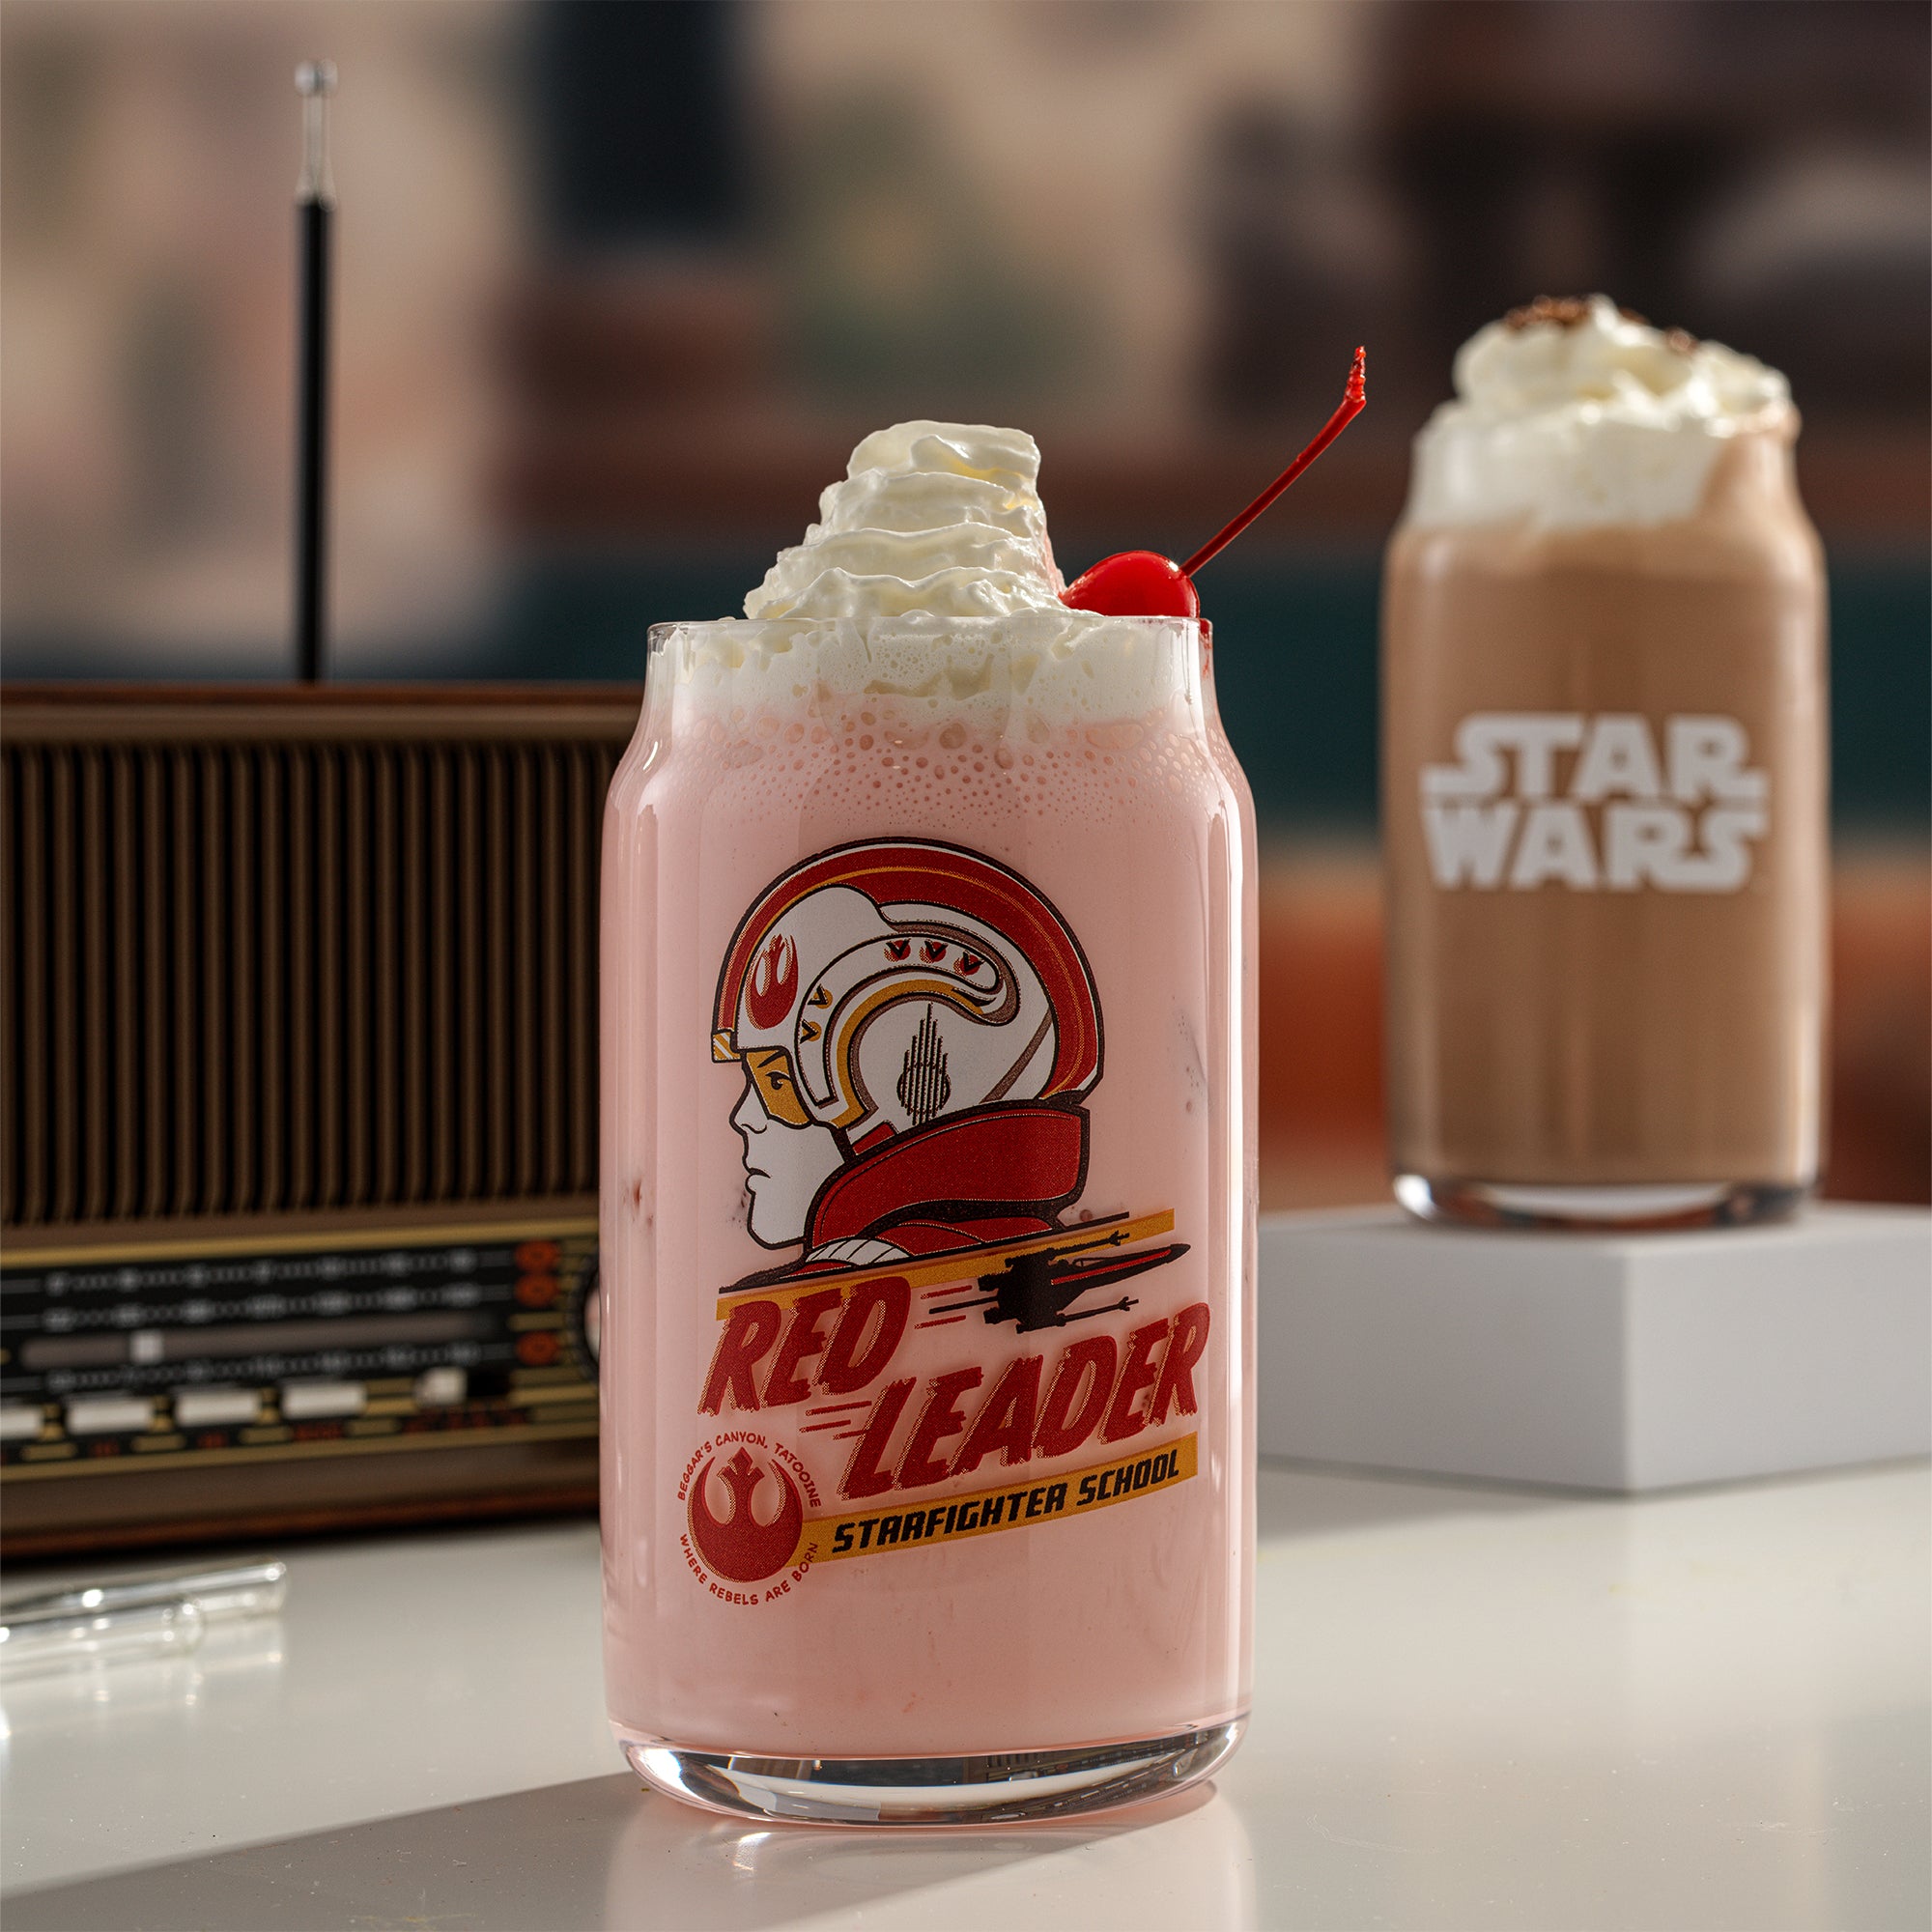 Retro-inspired Star Wars can-shaped drinking glasses featuring the Red Leader and the Star Wars logo.